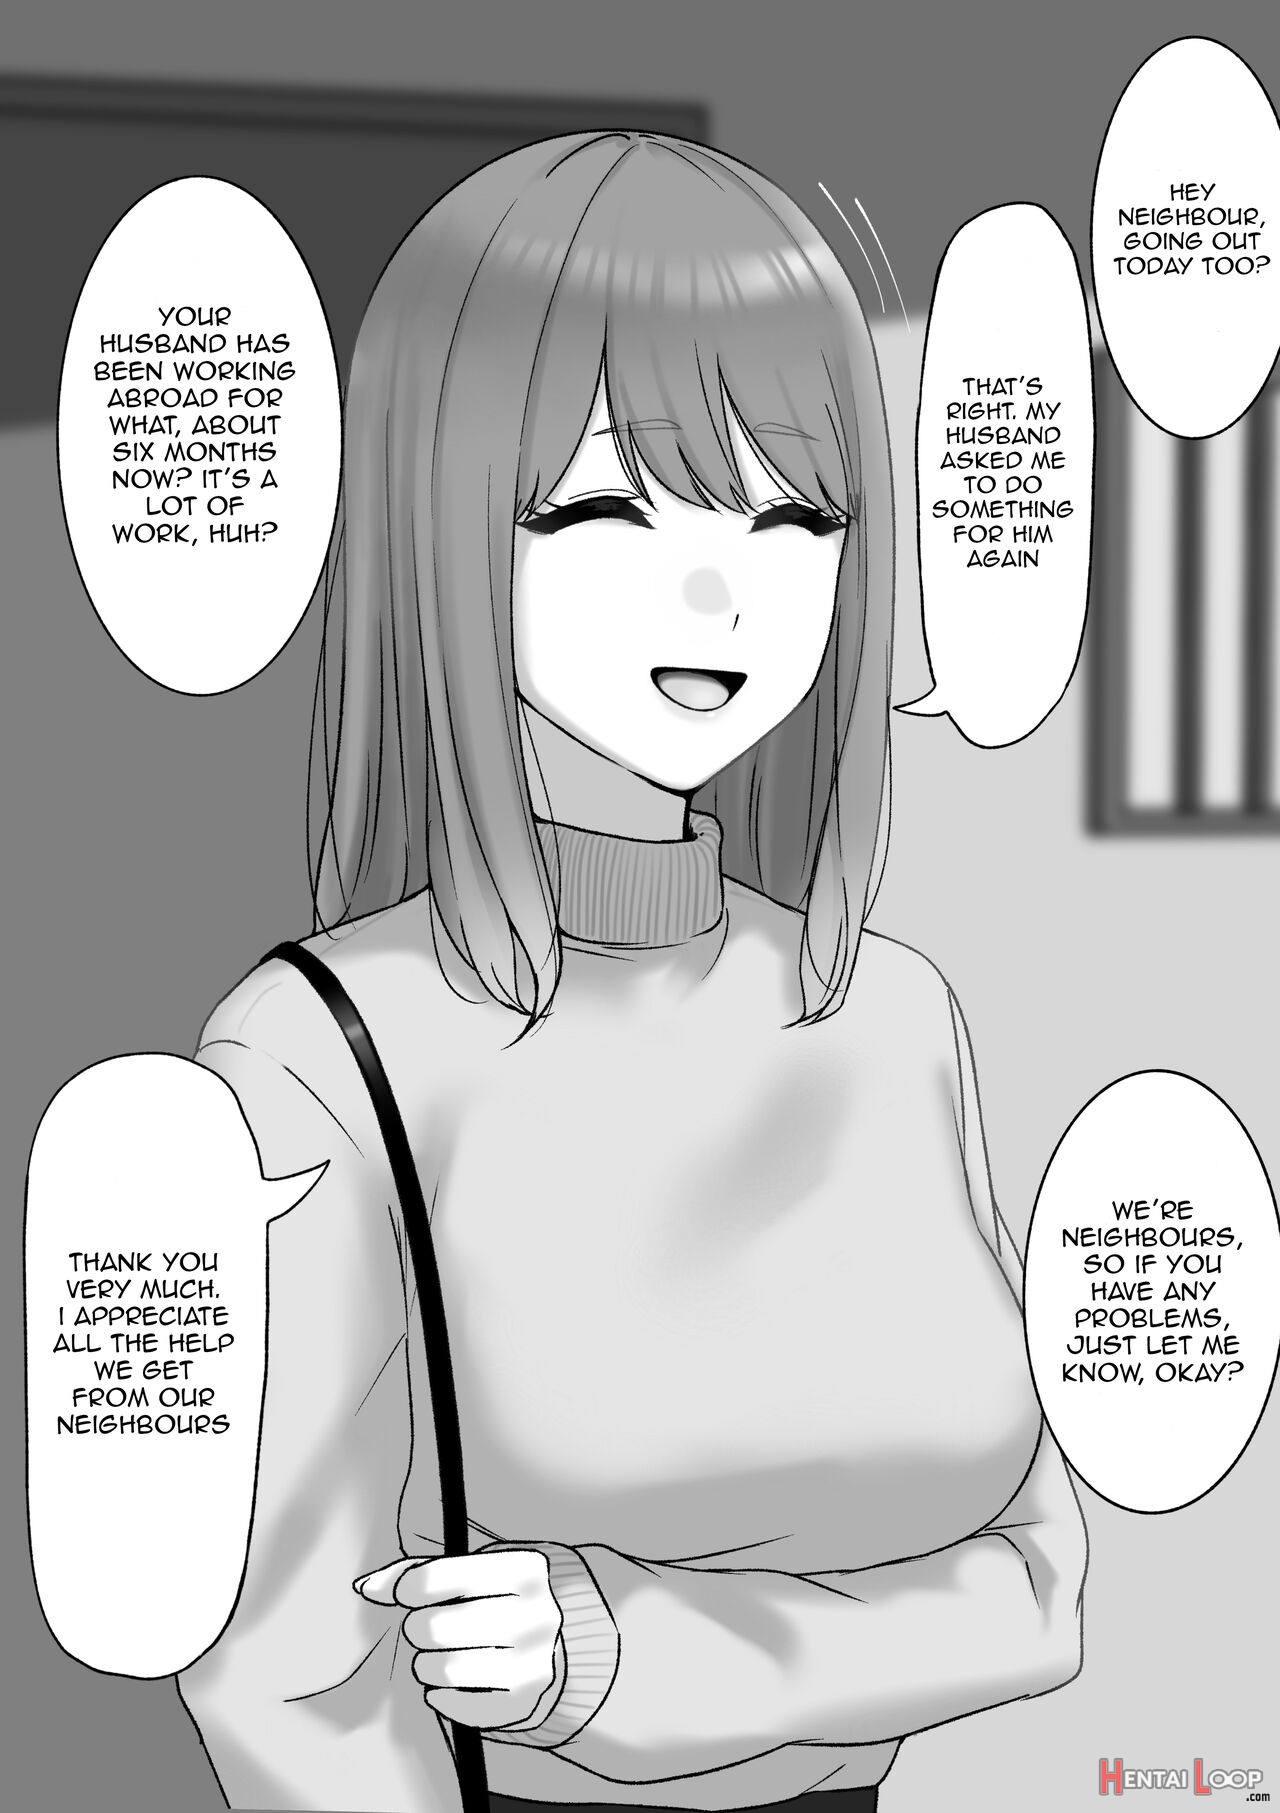 A Wife Whose Husband Is On A Business Trip Abroad (by Tantanmen)